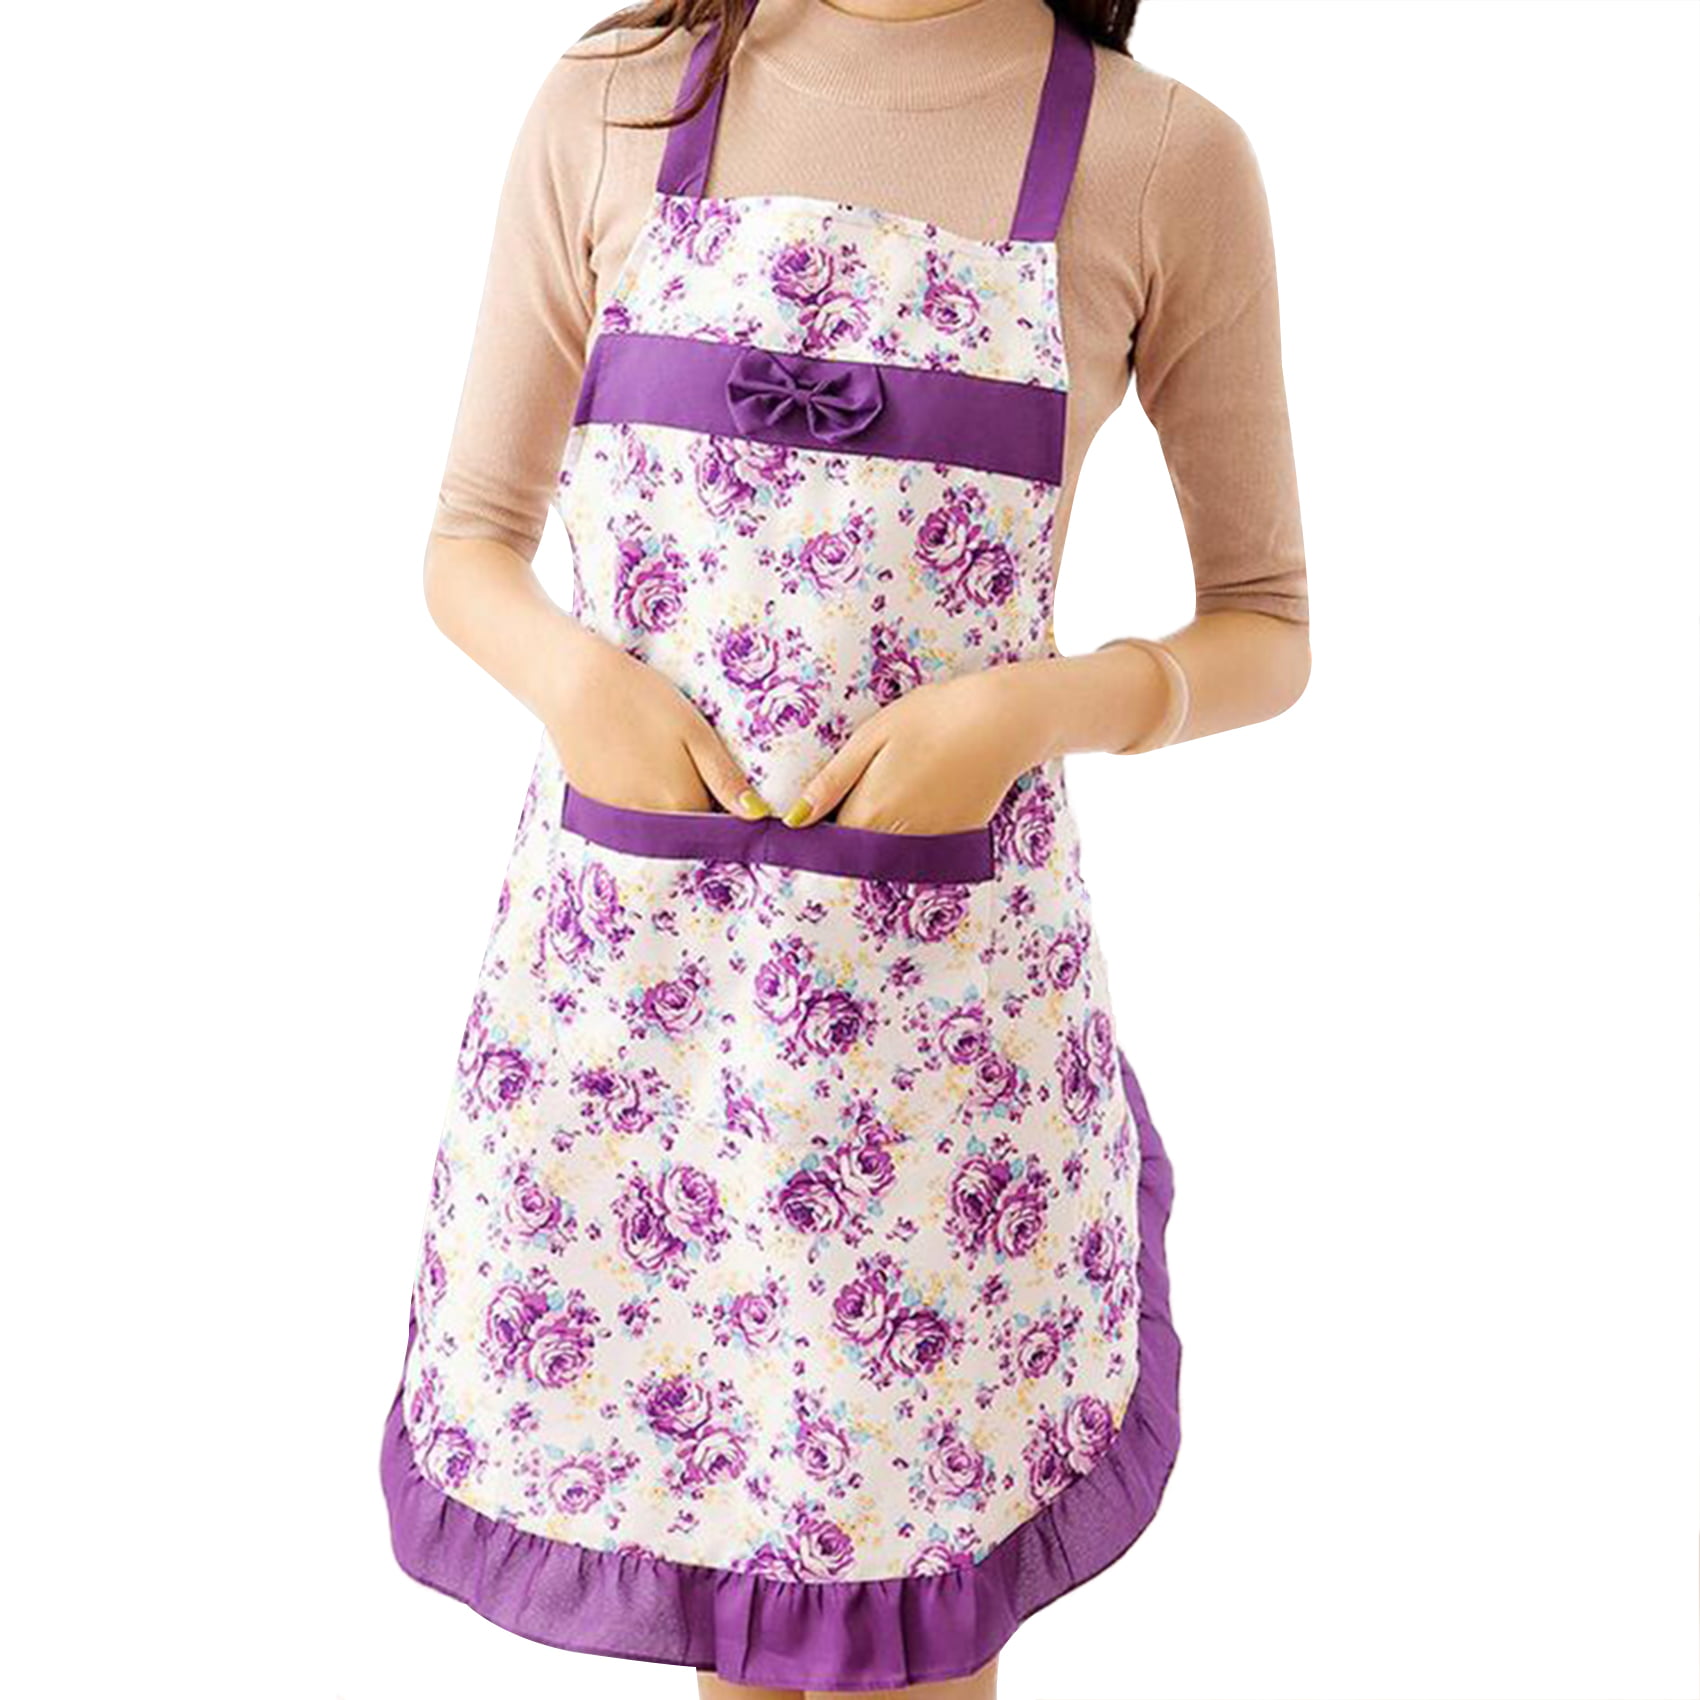 Hot Lady Floral Lacy Vintage Apron Housewife Waterproof Kitchen Cooking Pinafore